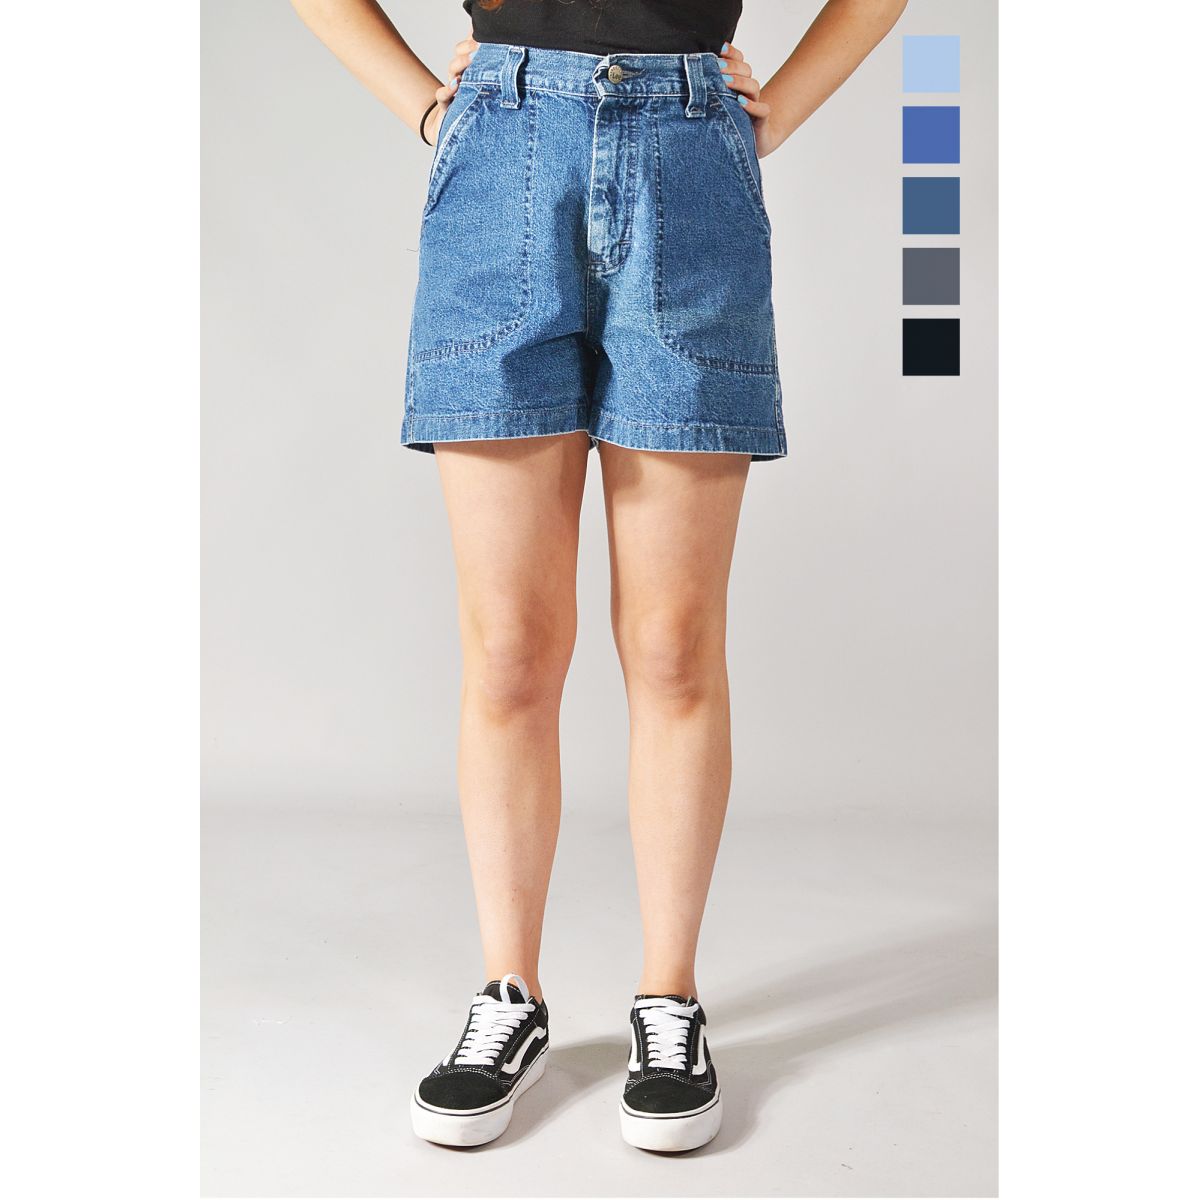 Buy Mirage Short Nina Blue Organic Online | Rollas Jeans | Cute outfits,  Denim outfit, Casual outfits